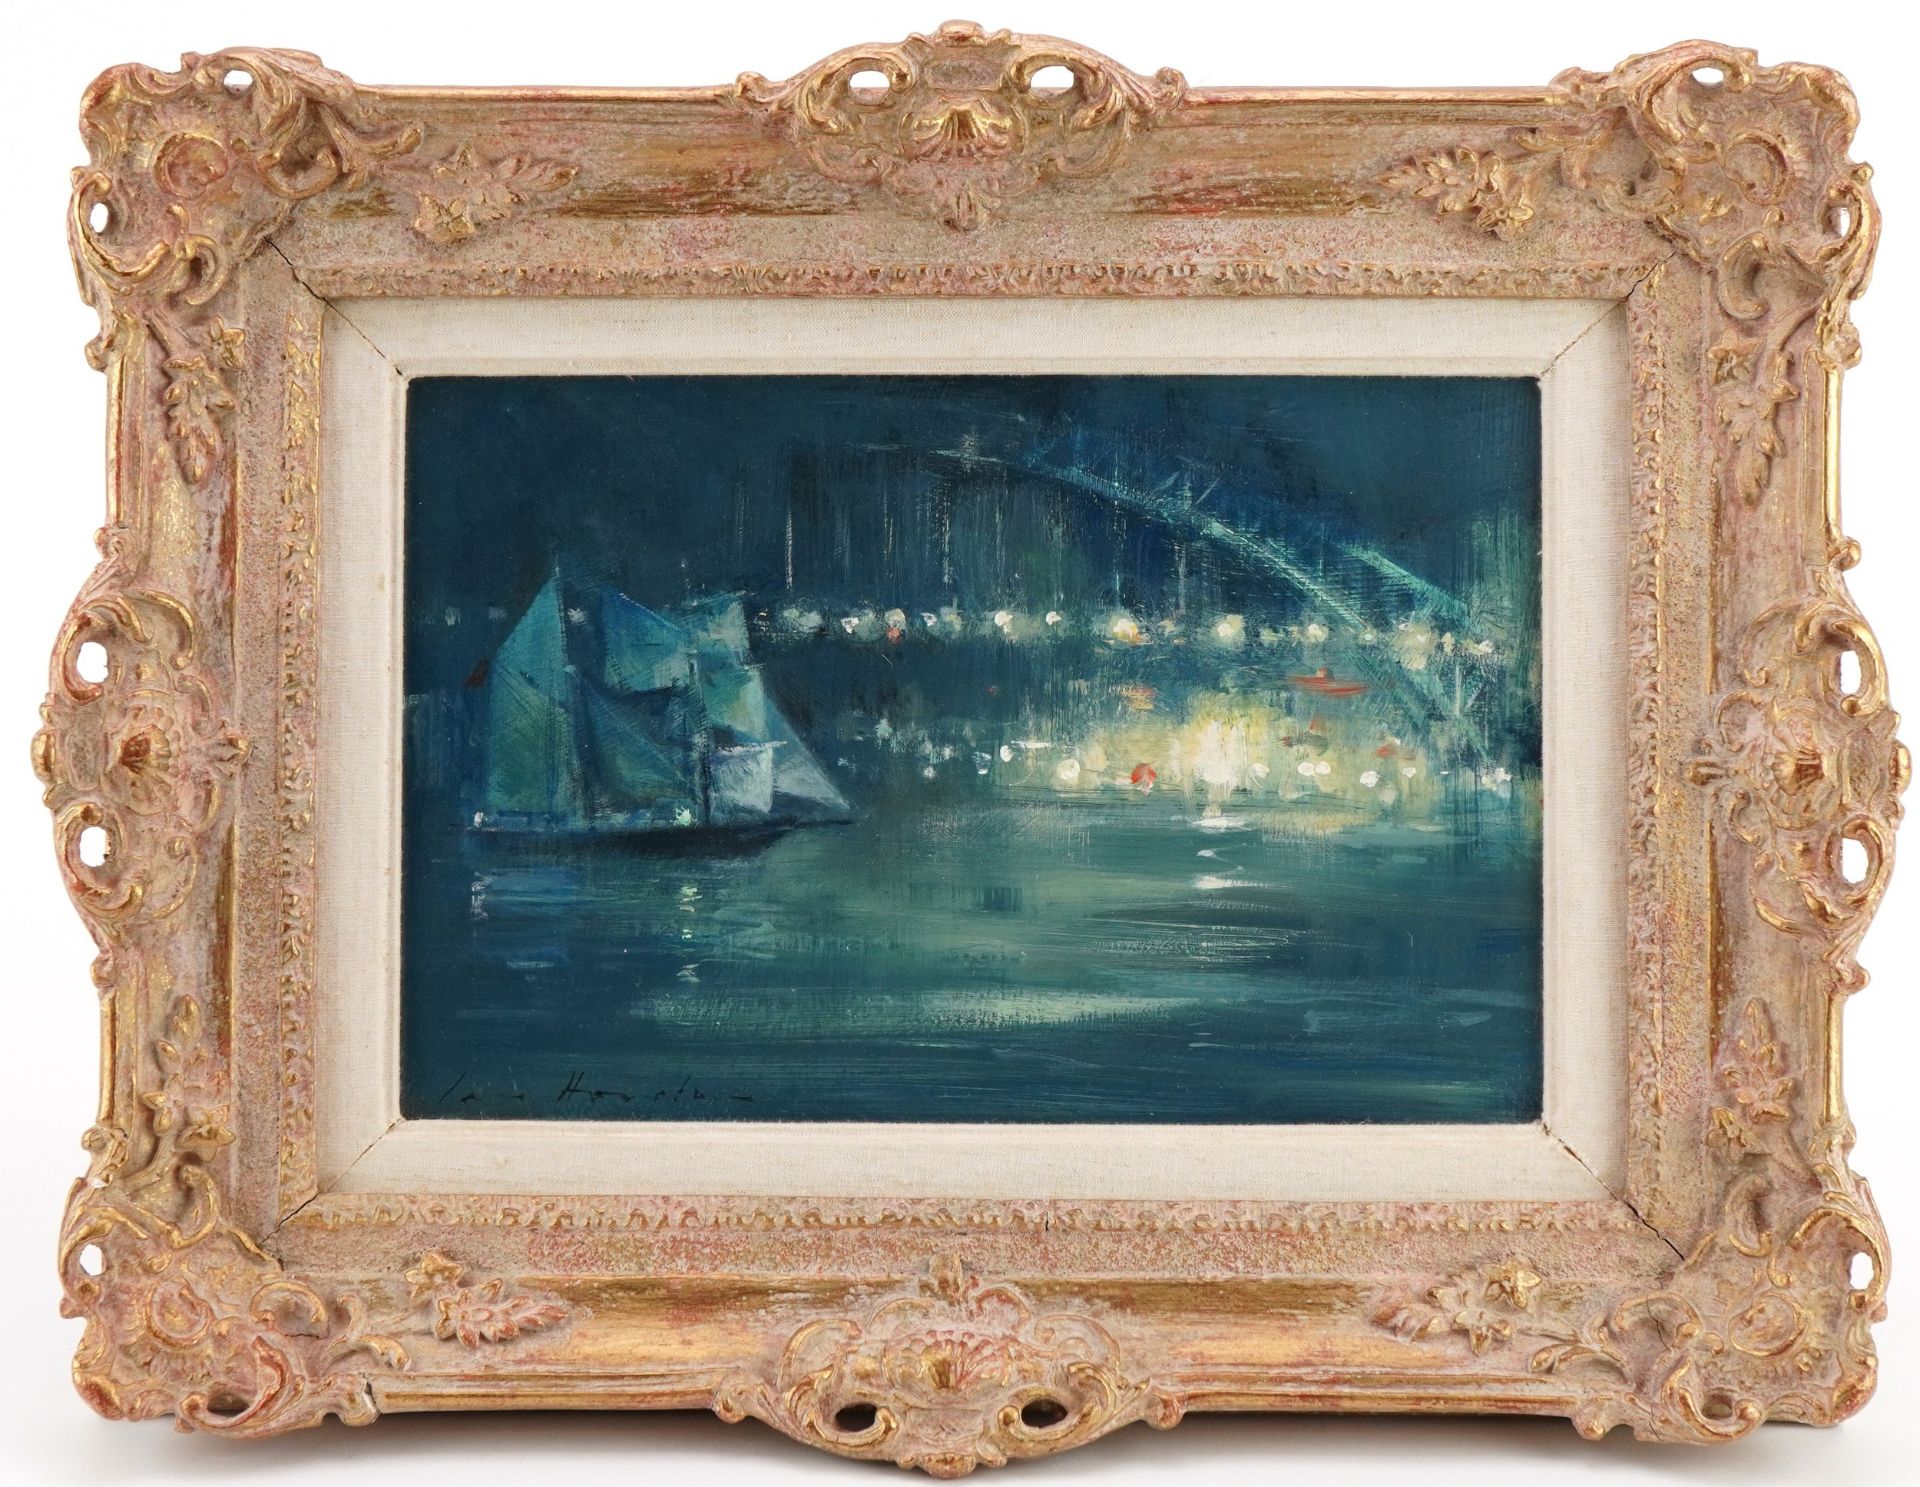 Ian Houston - Sydney Harbour, Nocturne, oil on board, Polak Gallery, London and inscribed label - Image 2 of 6